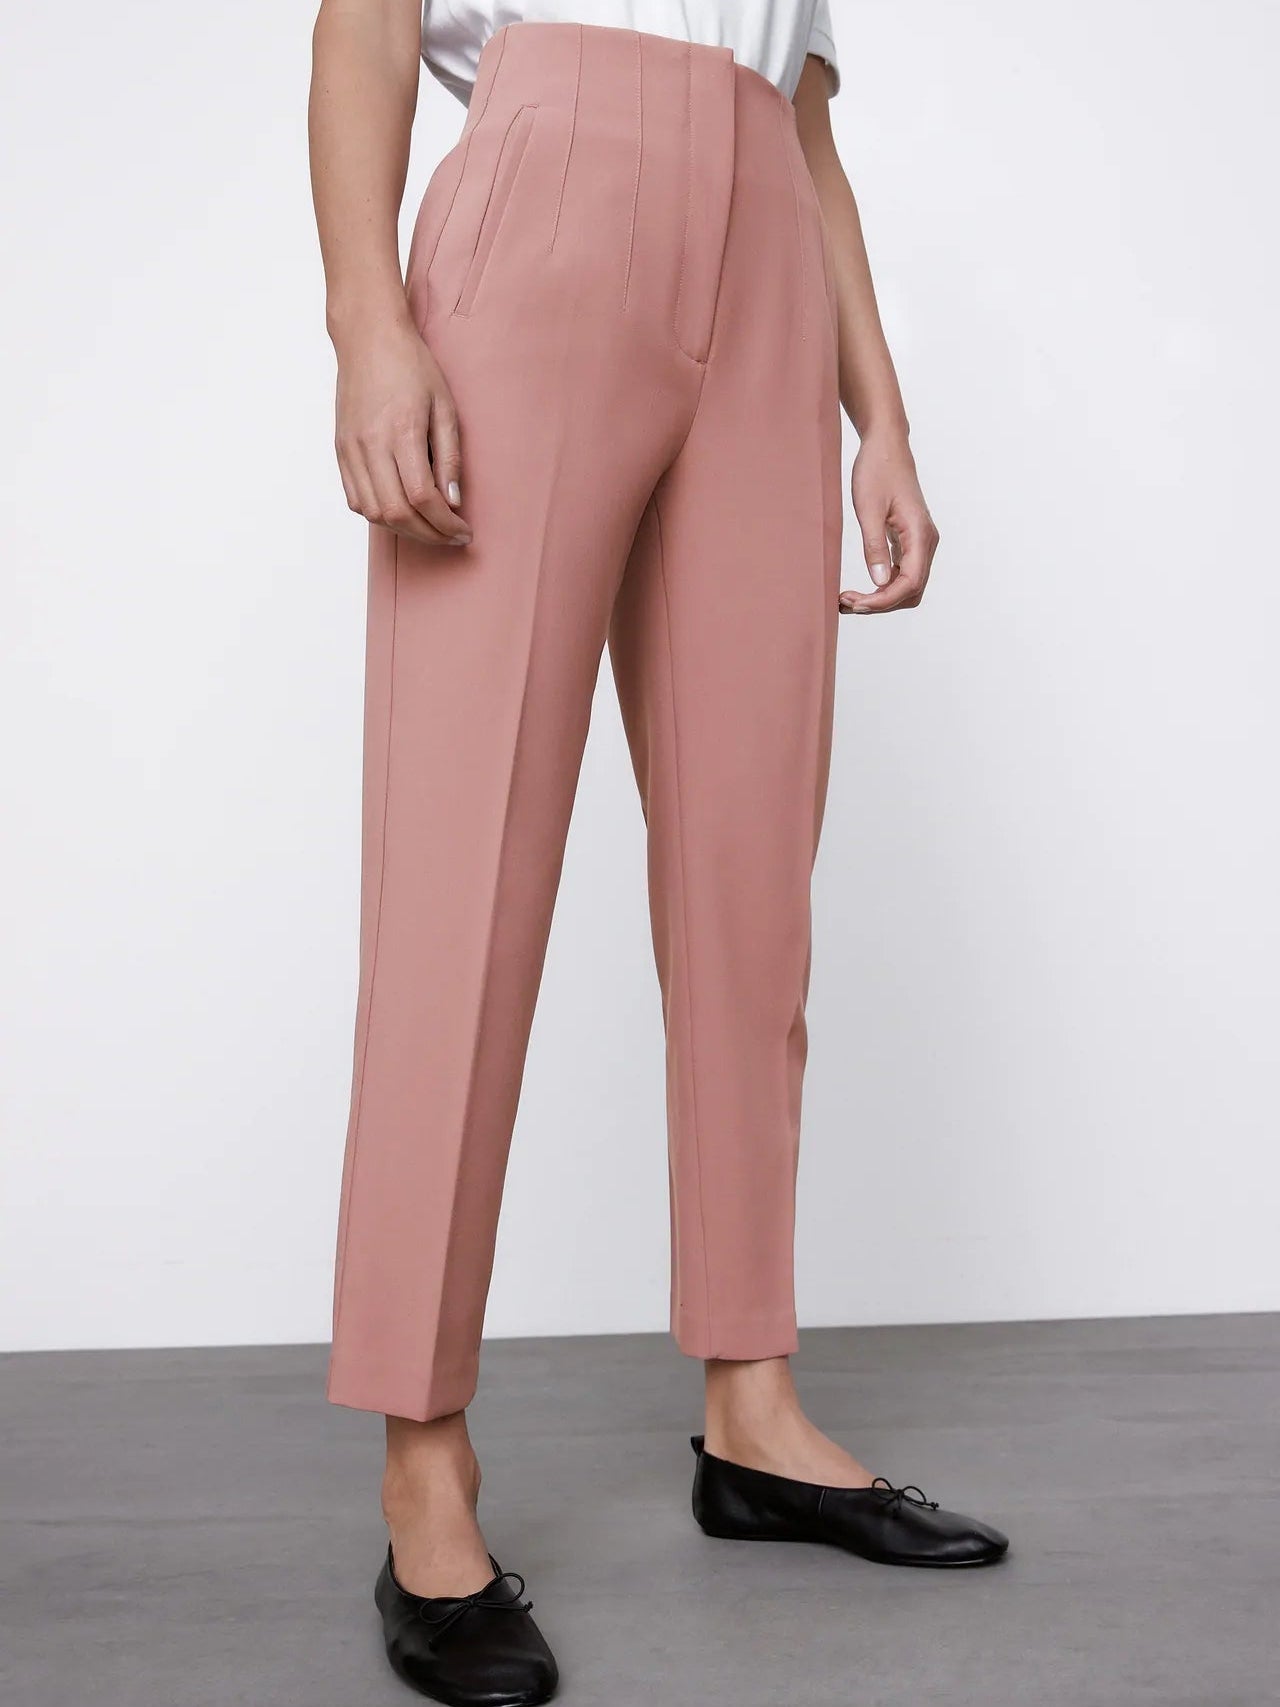 Pink Ladies Plain Ankle Length Cotton Pant, Waist Size: 28.0 at Rs  275/piece in New Delhi